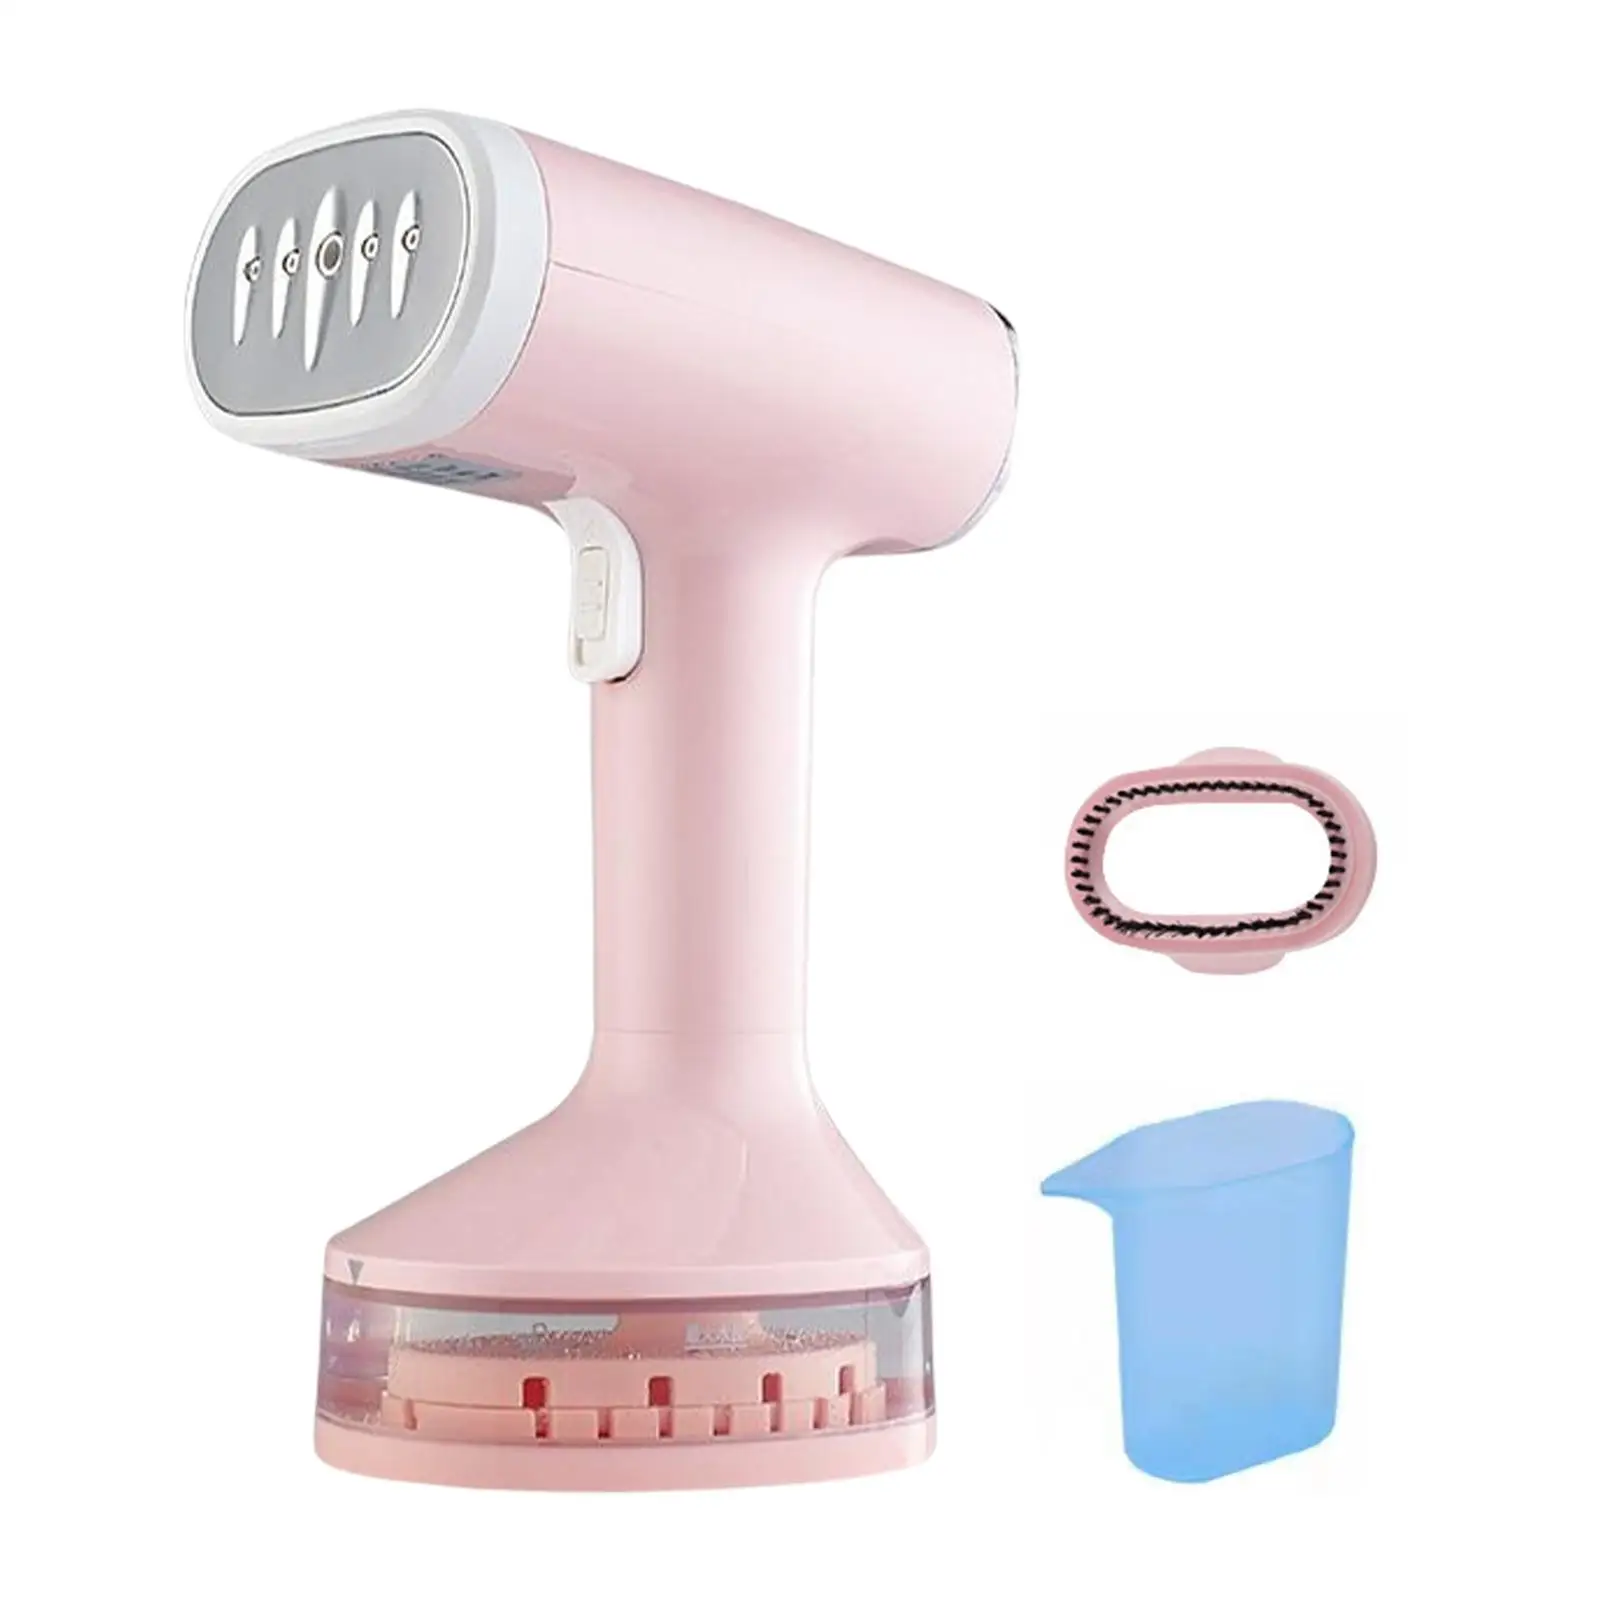 Greemosi Clothes Steamer Garment Steamer Portable Handheld Fabric Steamer 45 Seconds Heat-Up for Home and Travel 